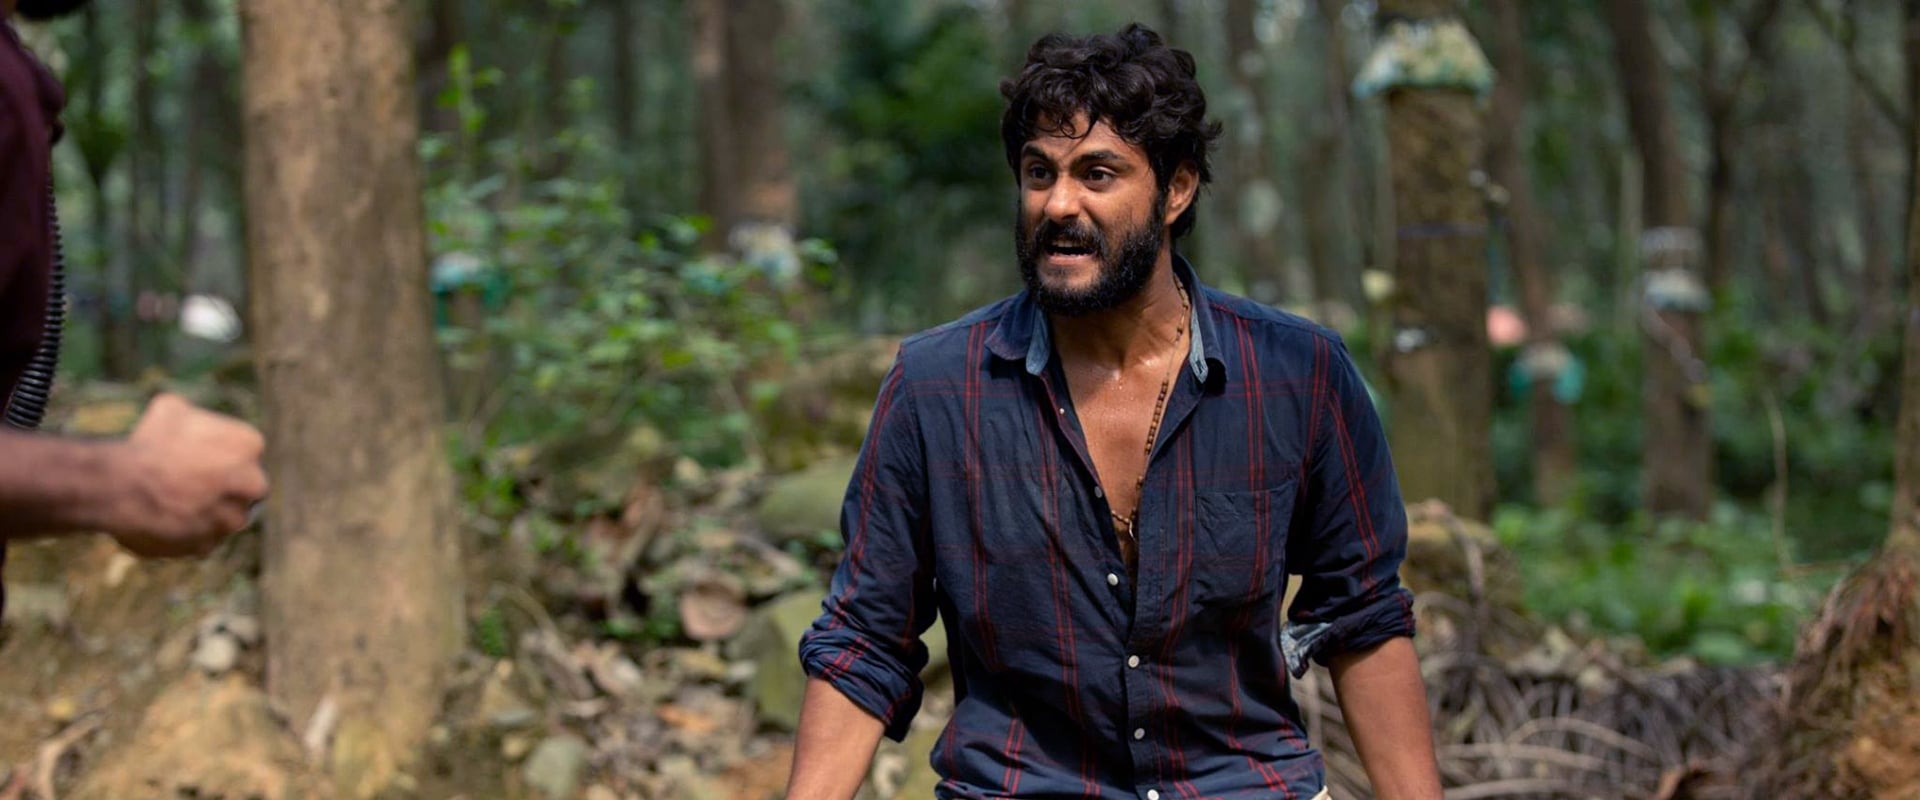 Angamaly Diaries